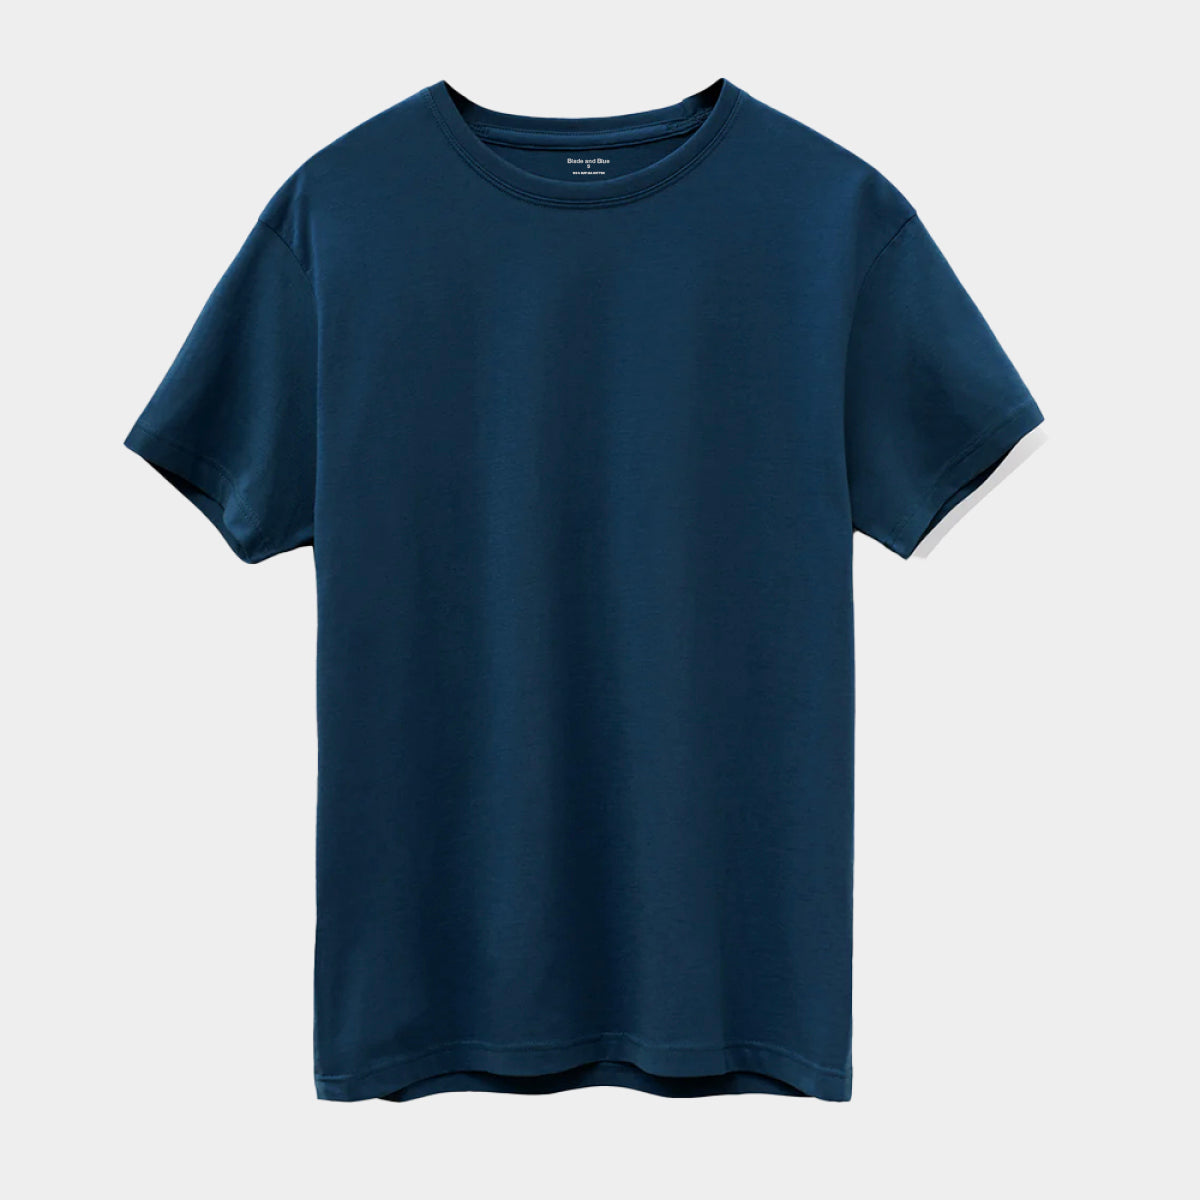 American Grown Supima 100% Cotton T-Shirt in Navy Blue